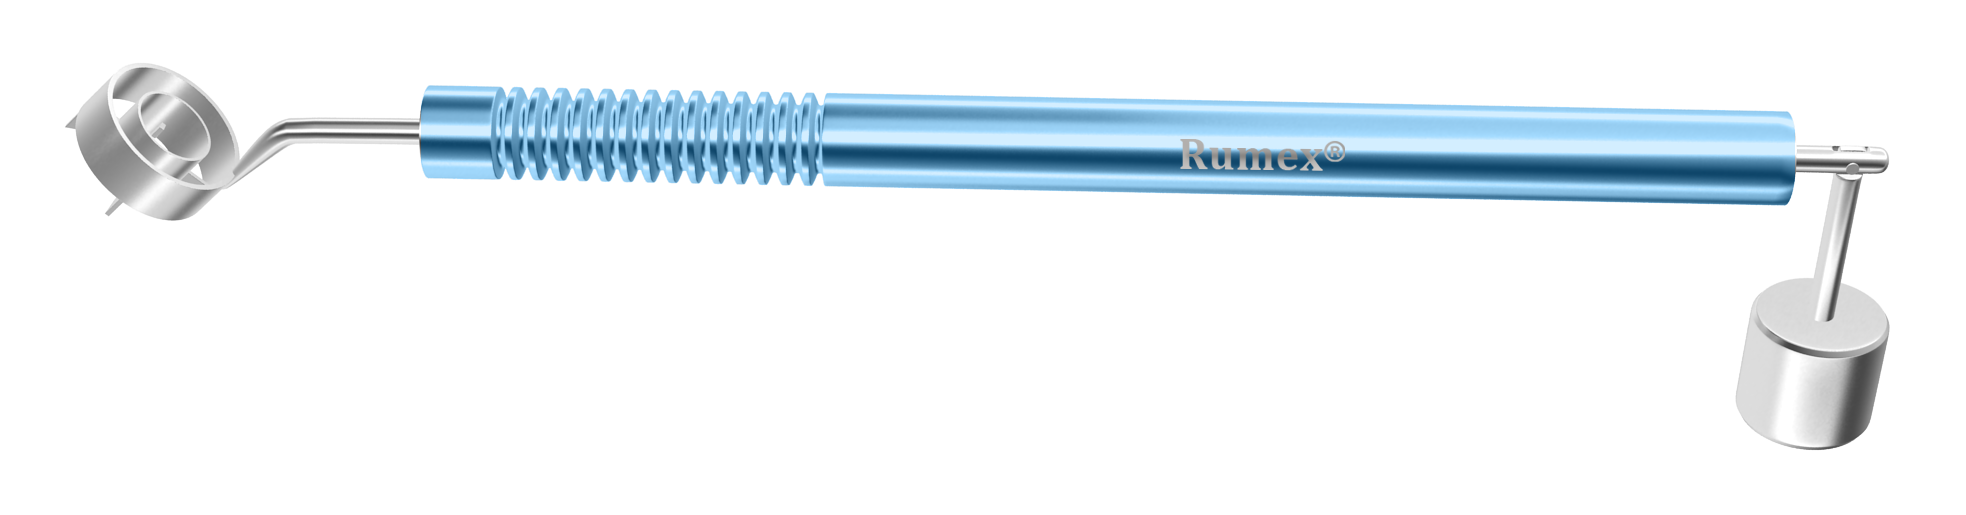 428R 3-195 Velasquez Gravity Corneal Marker for LRI/Toric IOL Implantation, Angled Shaft, 4 Radial Blades for Horizontal and Vertical Axes Marking, 5 mm Diameter Internal Ring, Length 164 mm, Titanium Handle, Stainless Steel Gravity System